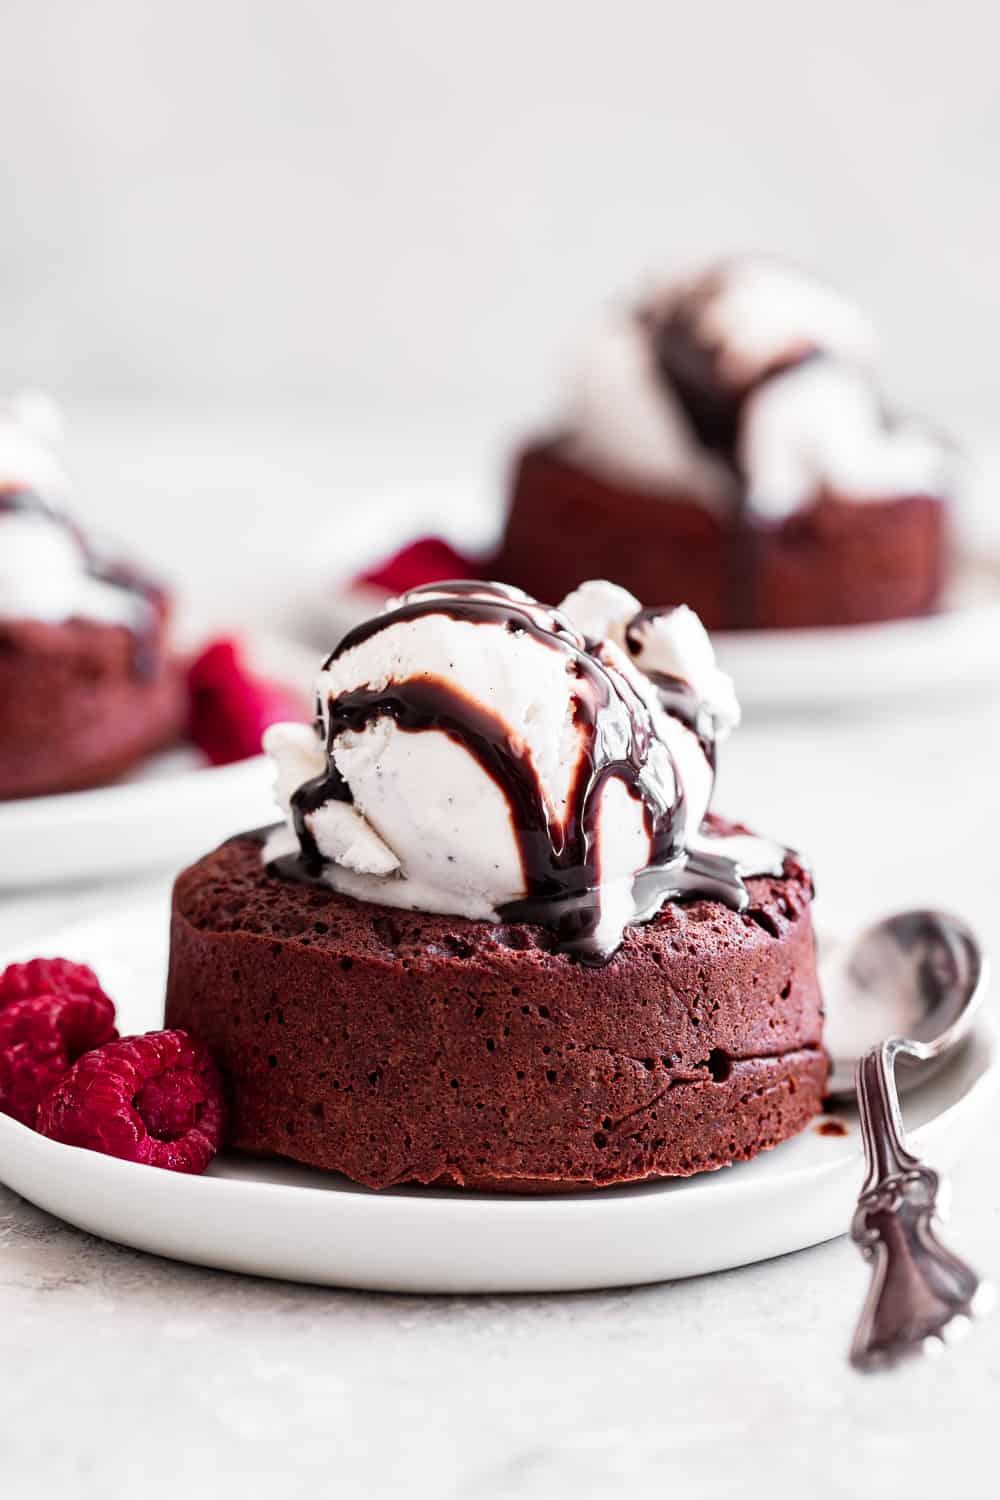 These simple chocolate molten lava cakes taste rich and decadent with a gooey chocolate filling.  They're made without flour or refined sugar but you would never guess!  It's the perfect easy treat to make for Valentine's Day or whenever you're craving something ultra chocolatey.  Gluten free, grain free, and paleo friendly. #paleo #glutenfree #chocolate #glutenfreebaking #healthybaking #cleaneating